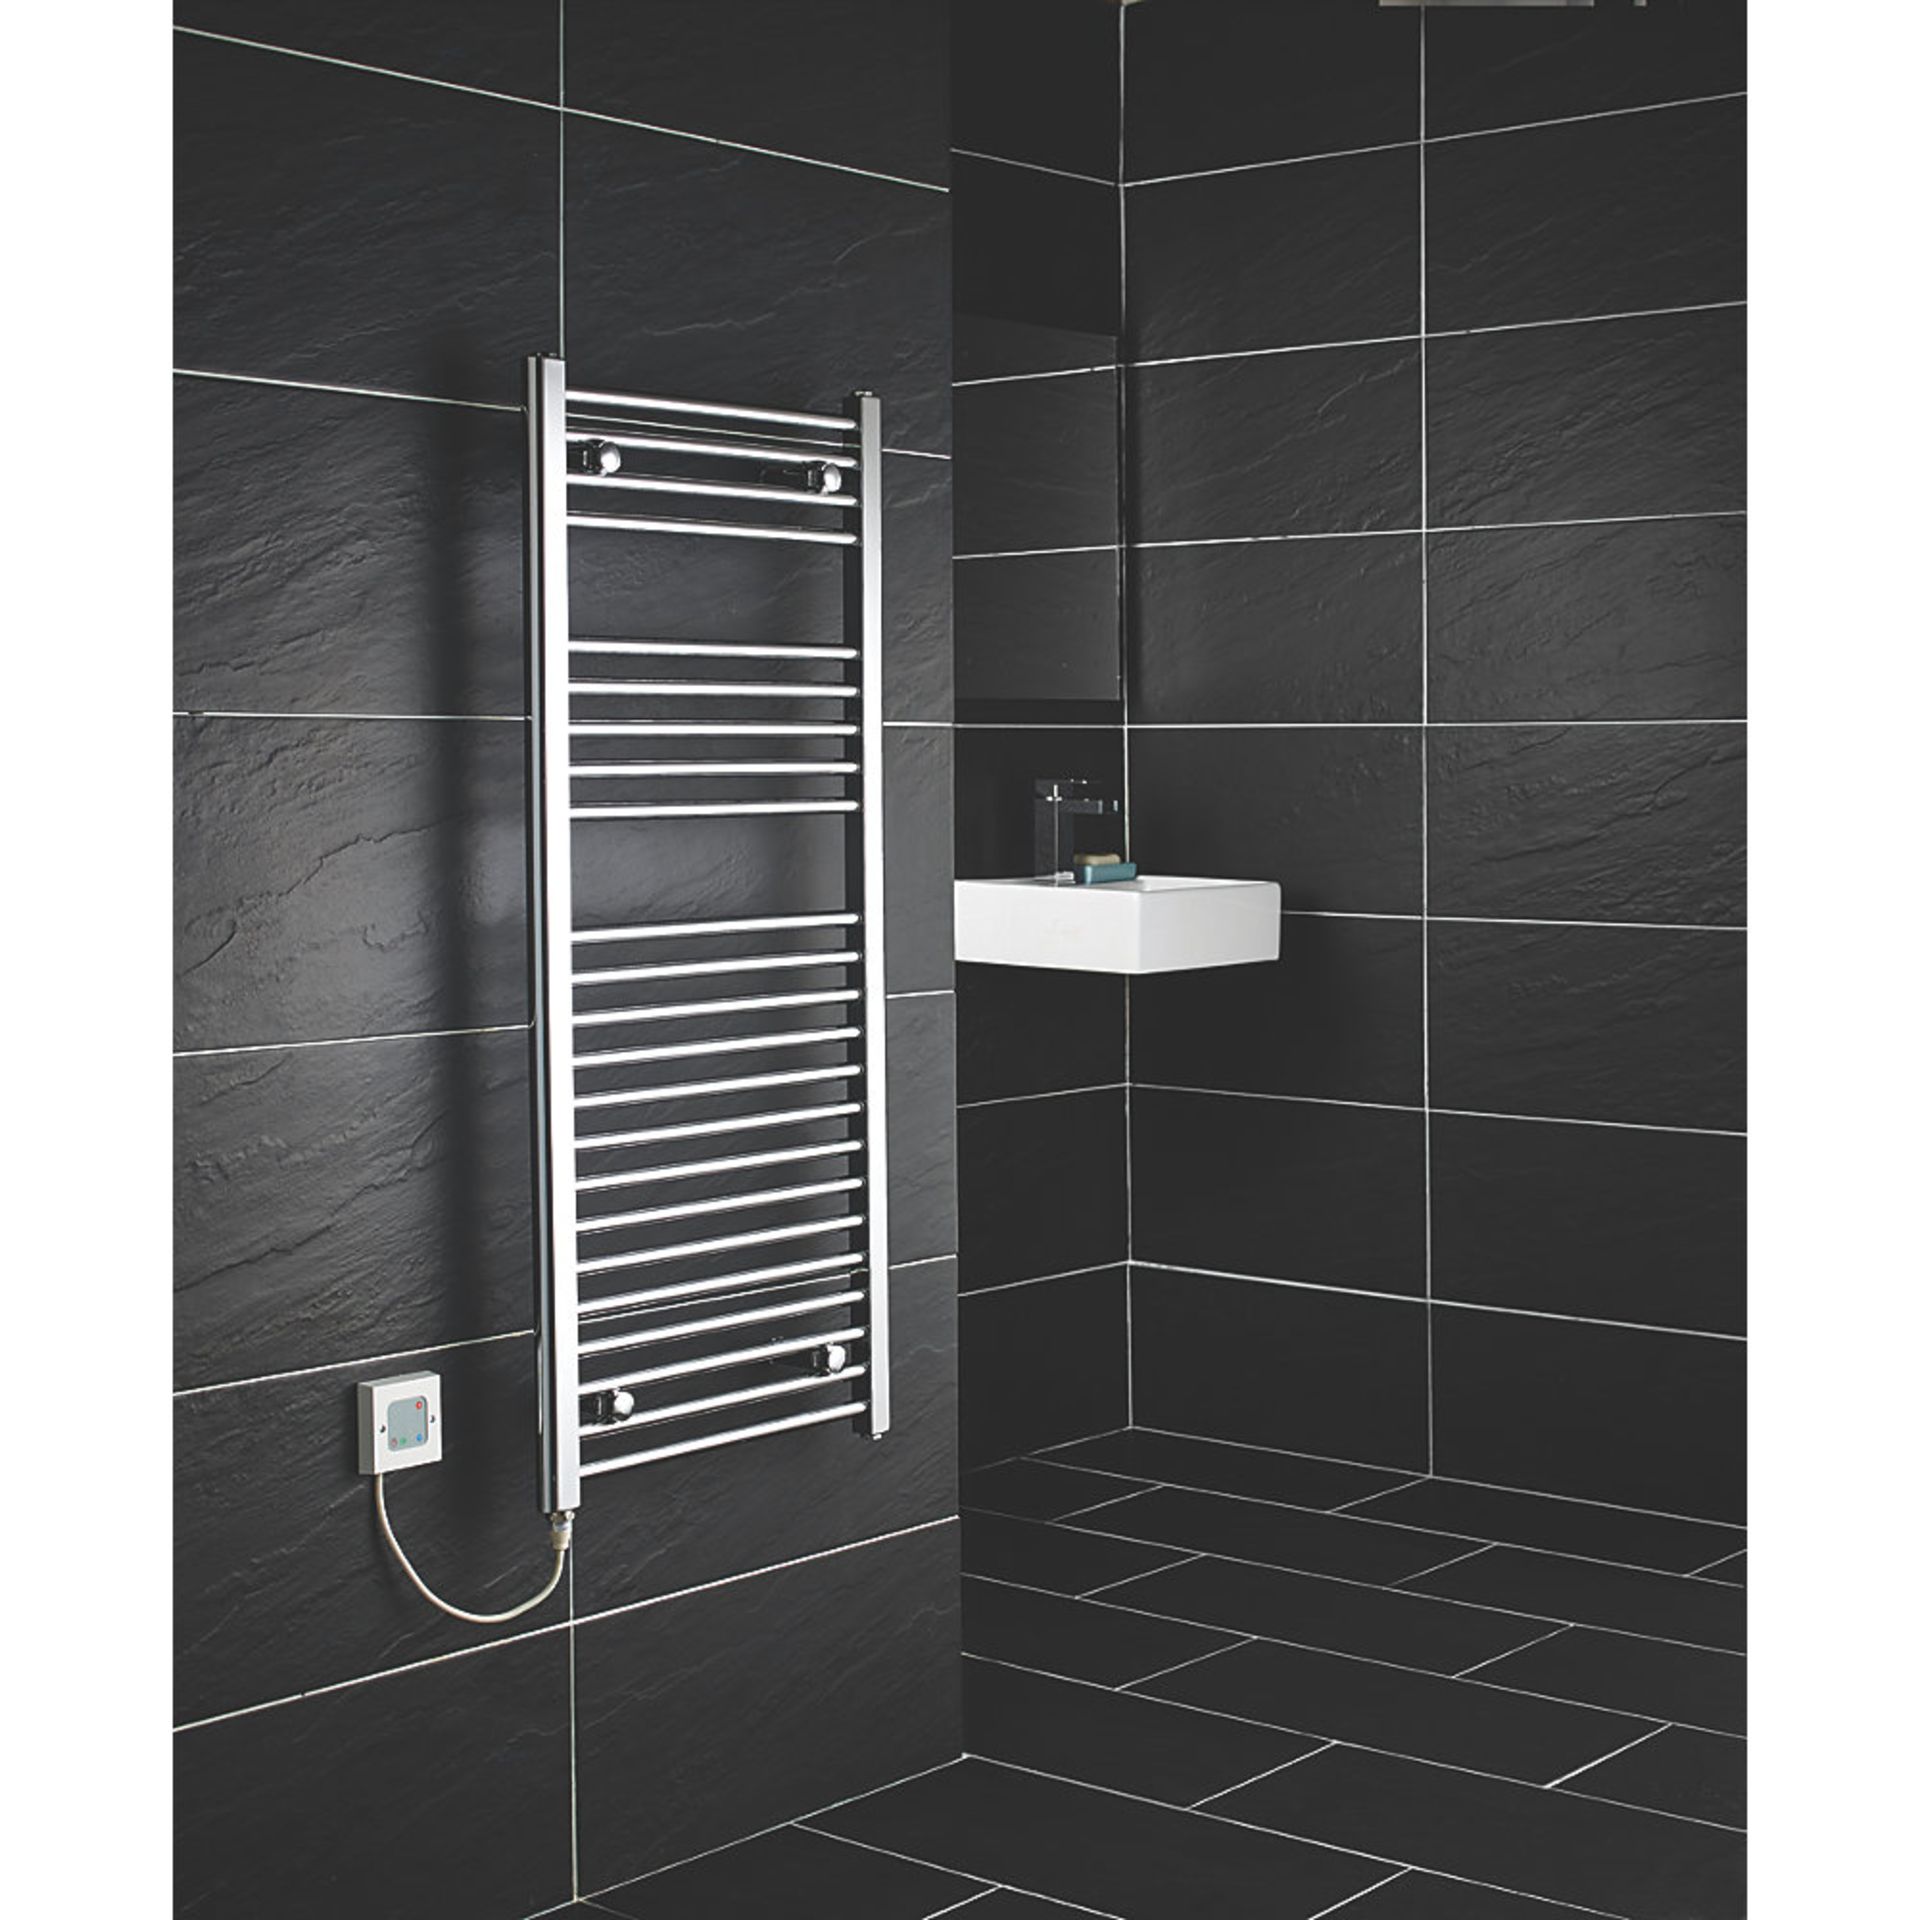 (CR19) 1100x500mm FLOMASTA FLAT ELECTRIC TOWEL RADIATOR CHROME. Electrical installation only. E...